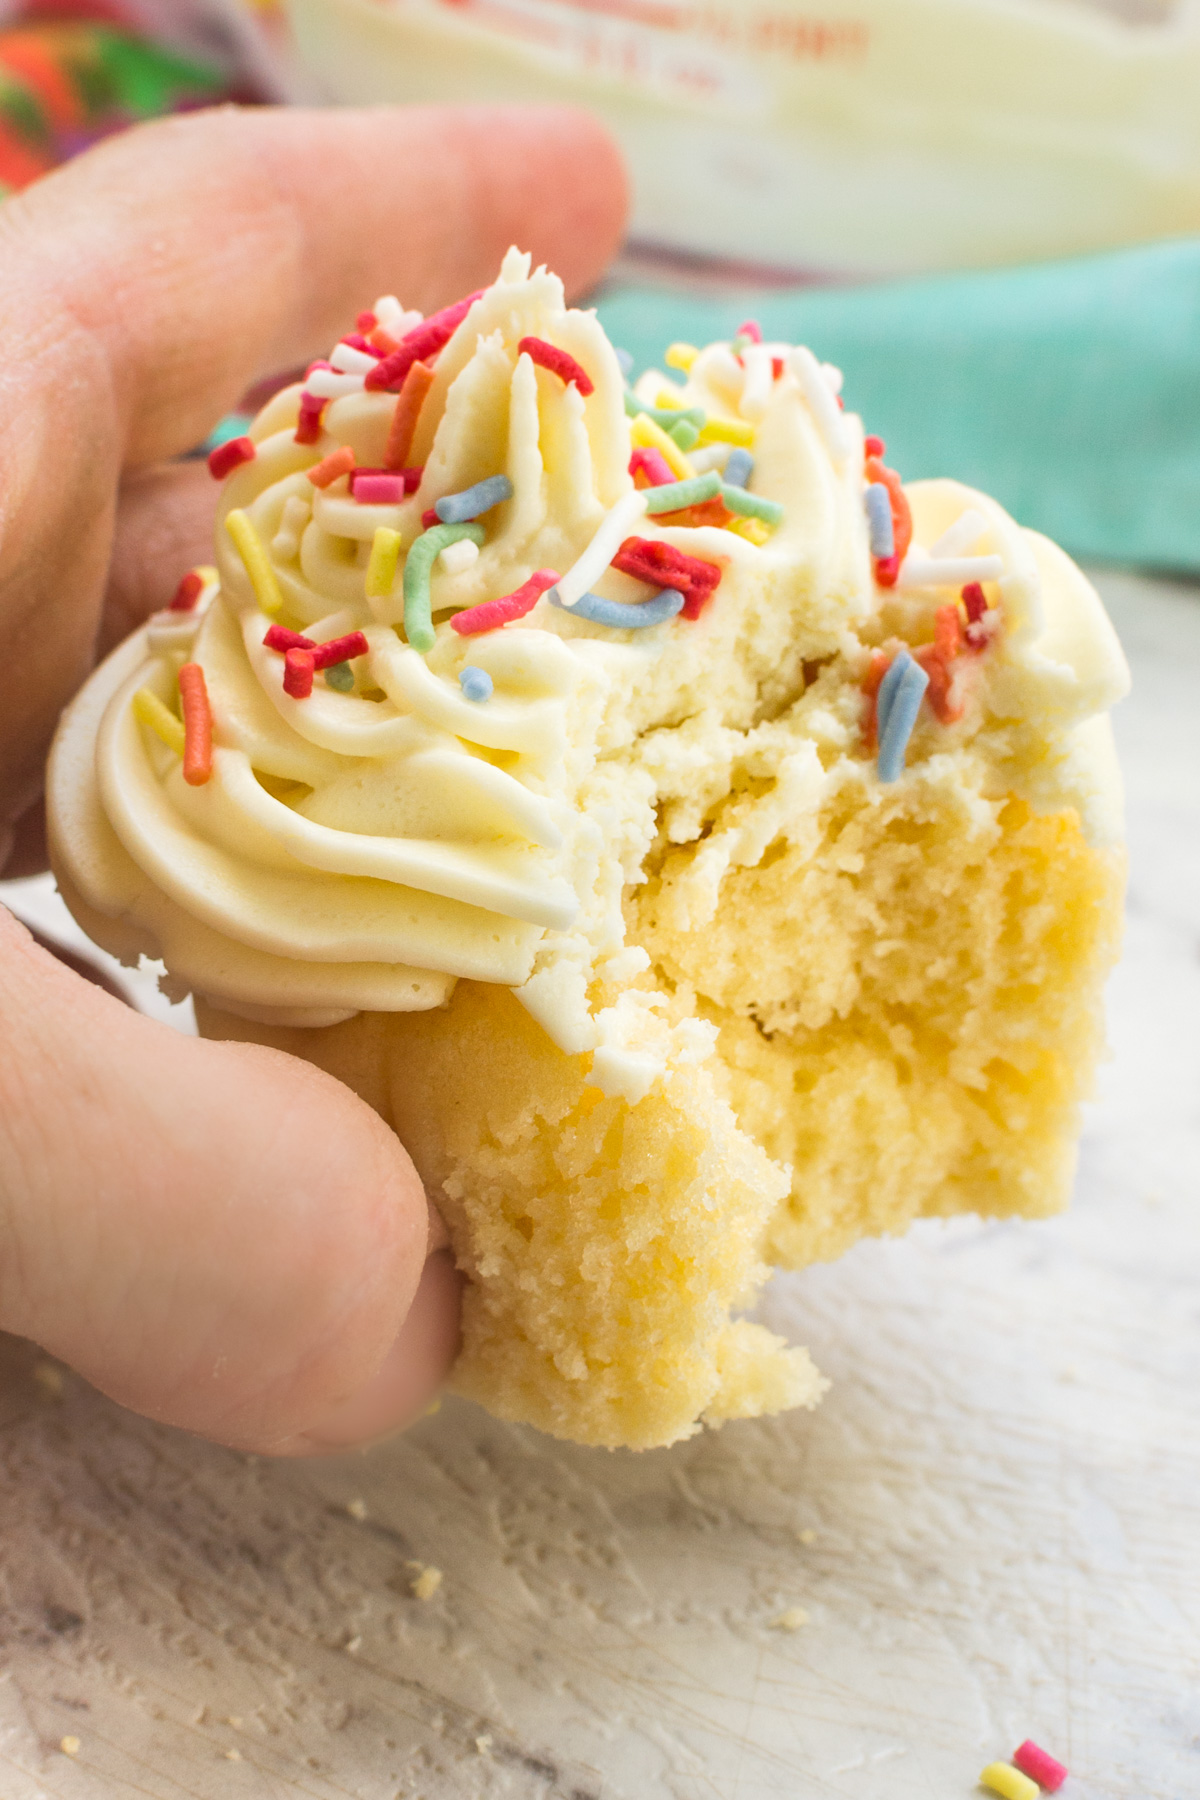 Someone holding up a healthier vanilla cupcake with frosting and sprinkles on it and with a bite taken out of it.